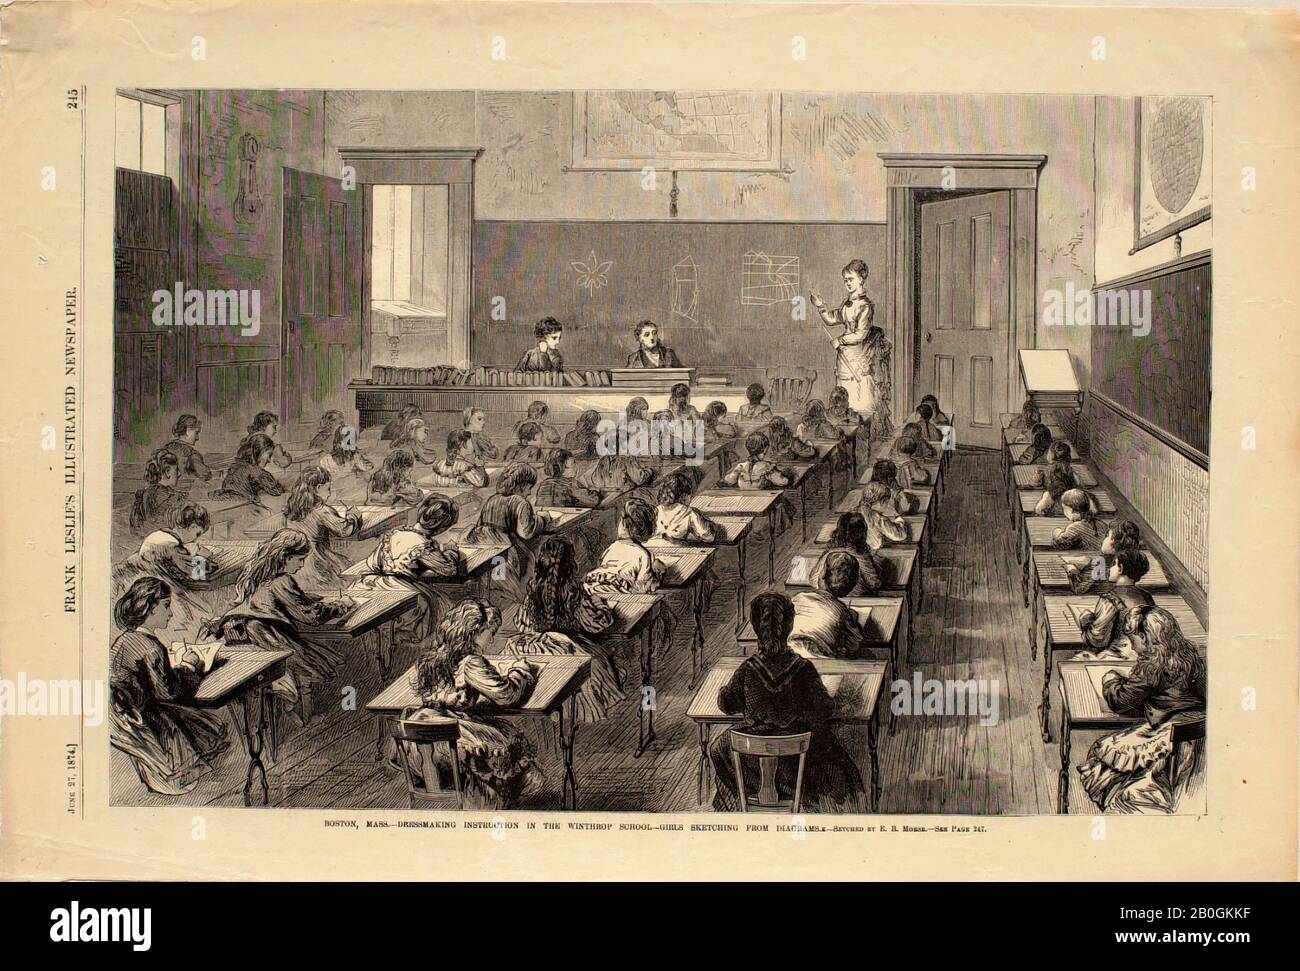 E. R. Morse, American, 19th century, Boston, Mass.—Dressmaking Instruction in the Winthrop School—Girls Sketching from Diagrams, From Frank Leslie's Illustrated Newspaper, 1874, Wood engraving on paper, image: 9 1/8 x 13 7/8 in. (23.1 x 35.3 cm Stock Photo